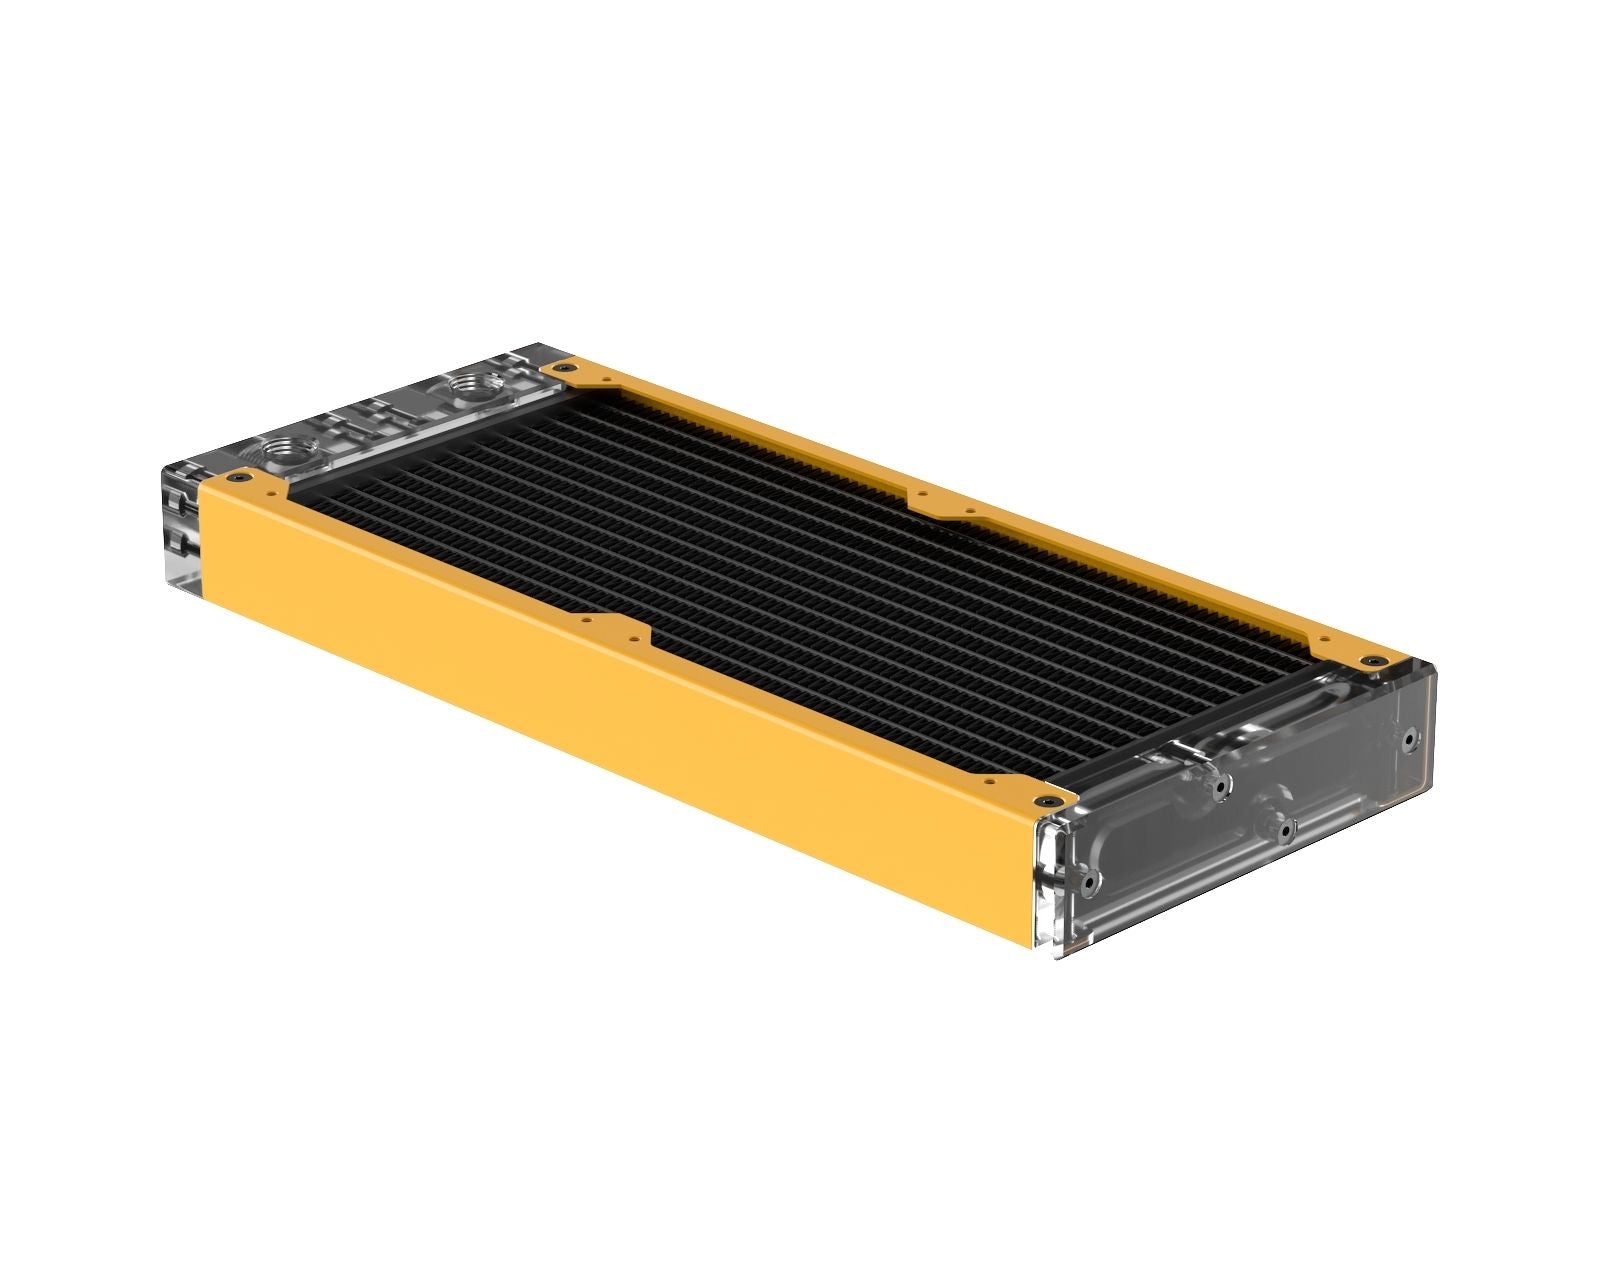 PrimoChill 240SL (30mm) EXIMO Modular Radiator, Clear Acrylic, 2x120mm, Dual Fan (R-SL-A24) Available in 20+ Colors, Assembled in USA and Custom Watercooling Loop Ready - Yellow